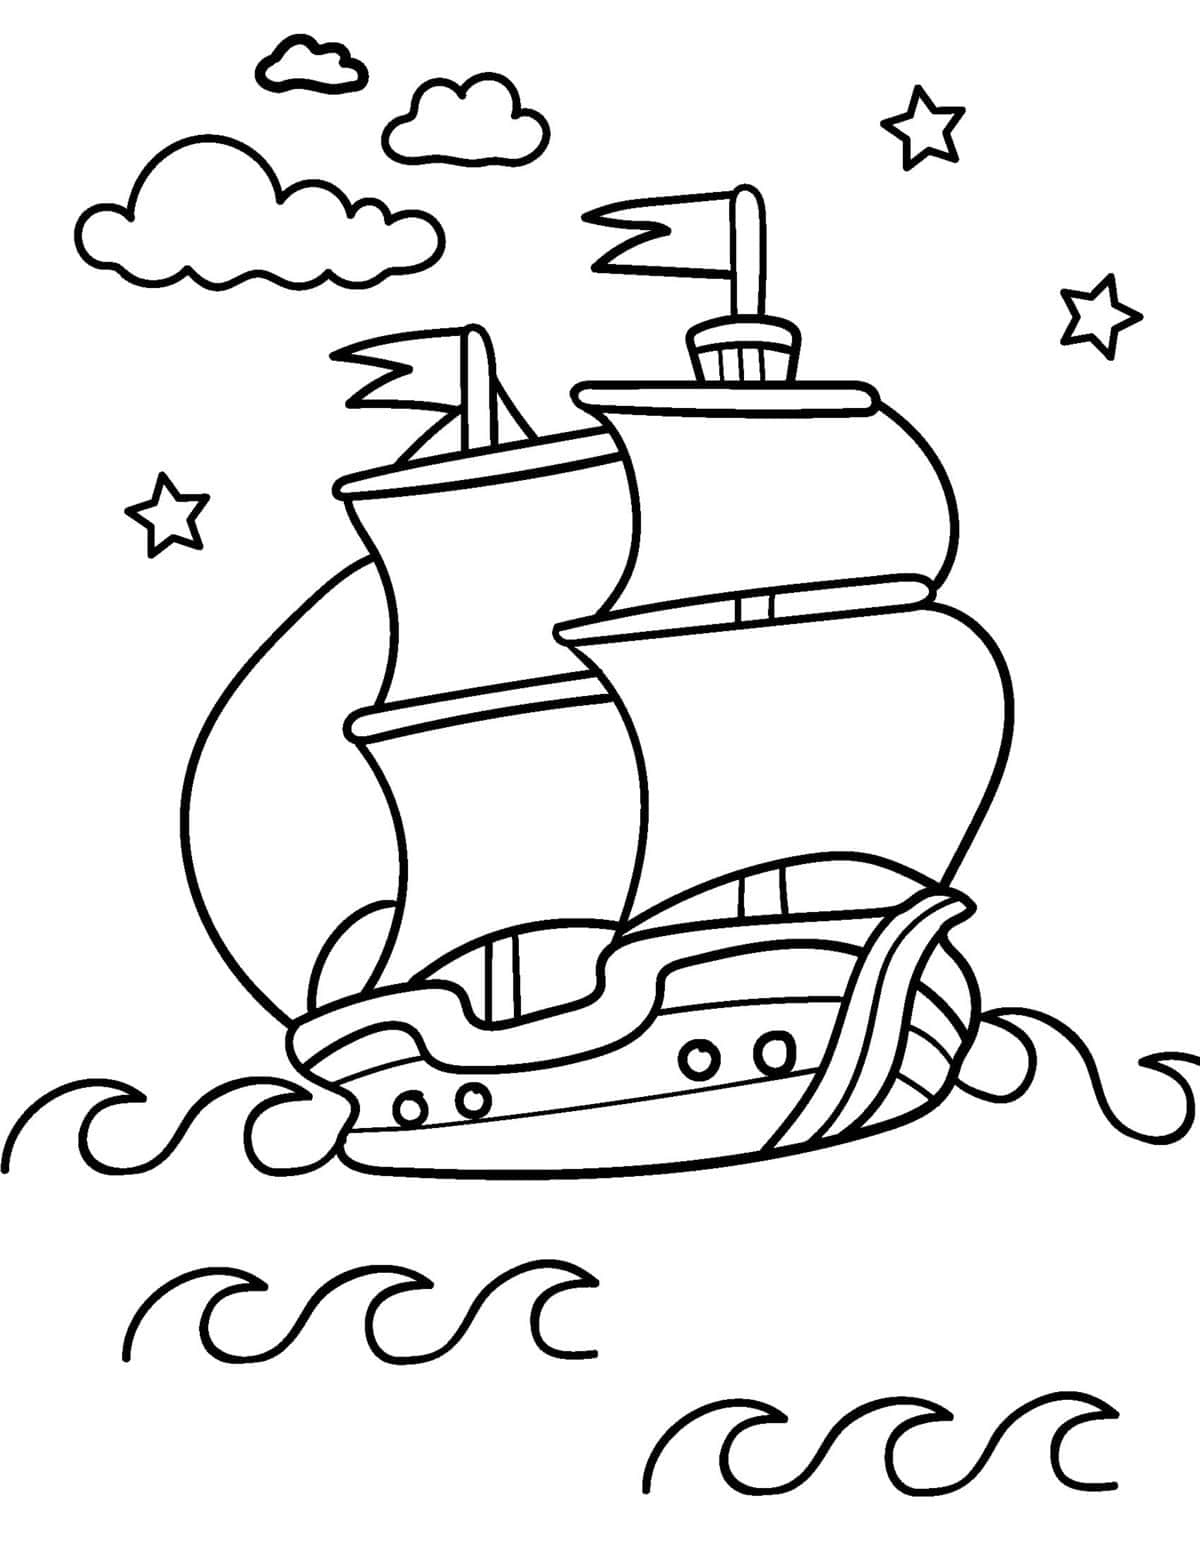 mayfair coloring page